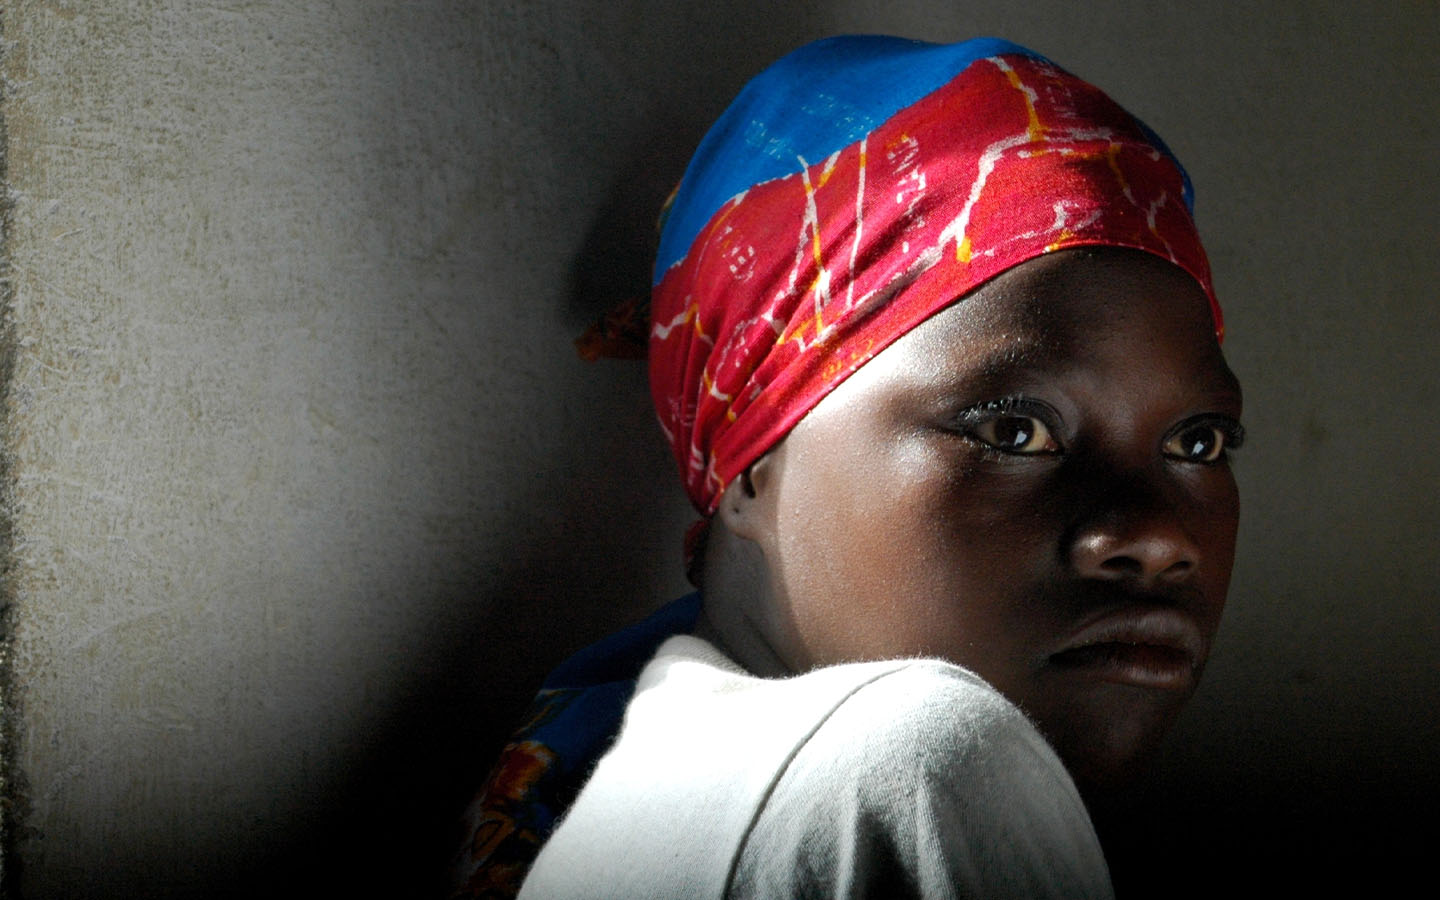 Child marriage ‘remains worrying’ in Mozambique